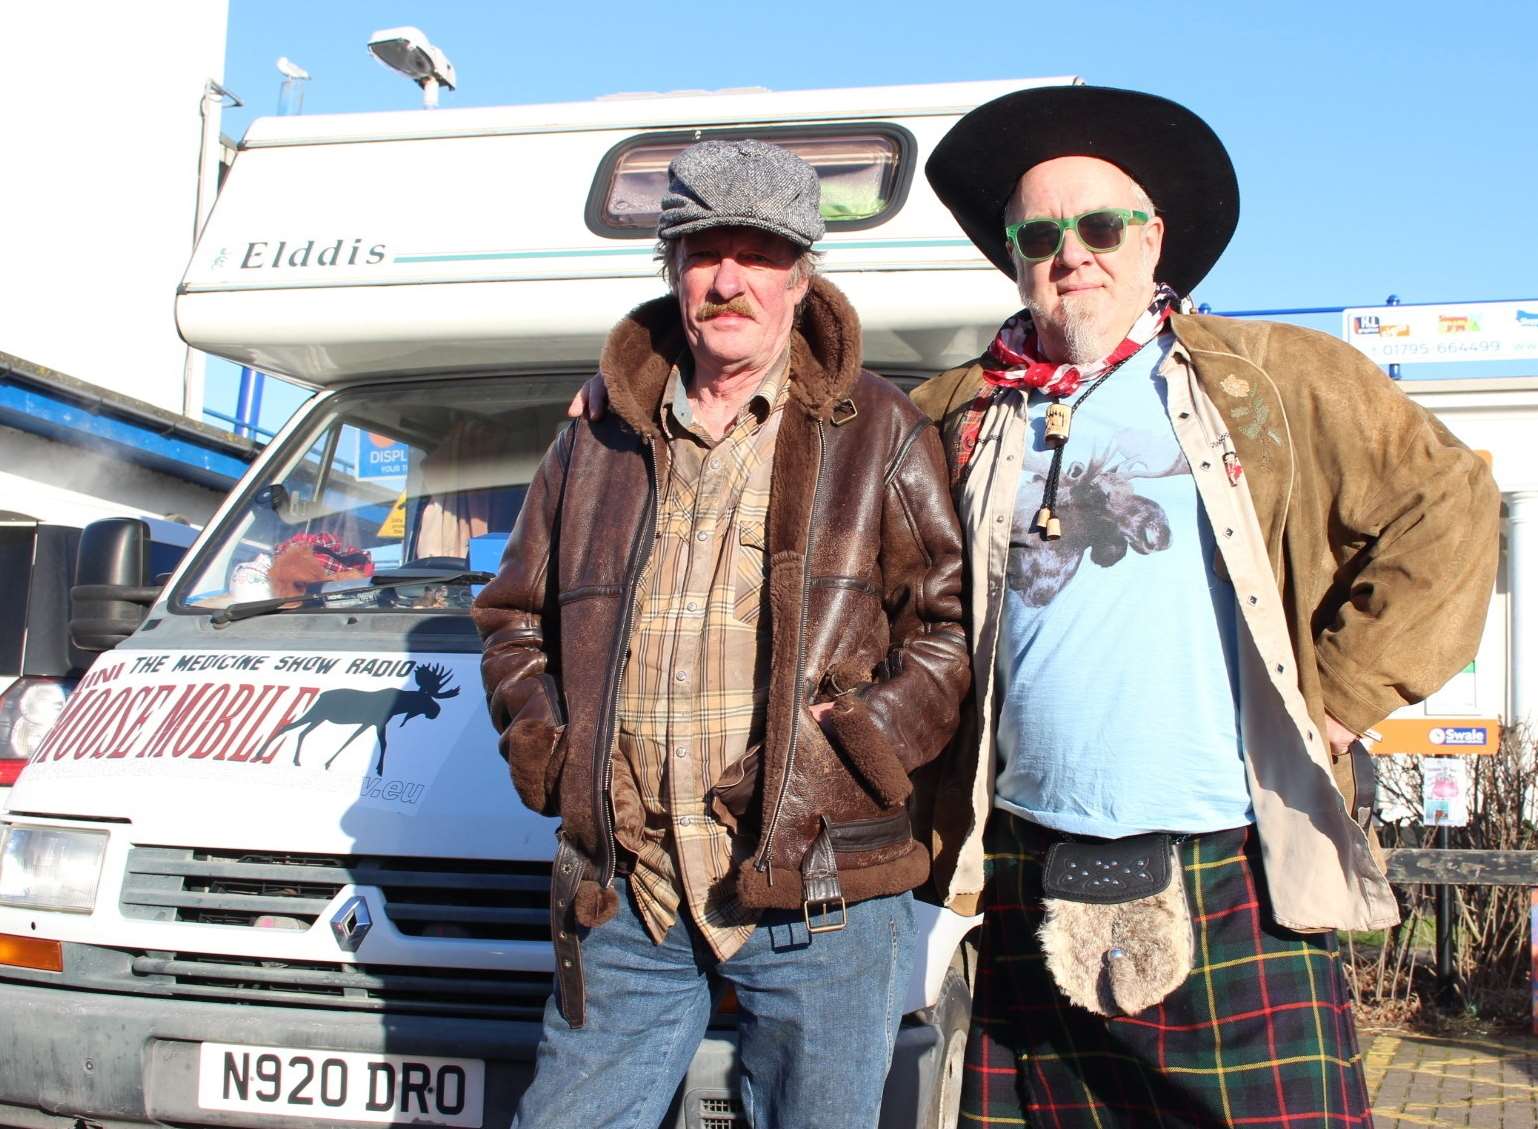 Scotsman Rob Ellen, who lives in a Renault camper van converted into a mobile recording studio, and his brother Mark, a Swale councillor and former drummer with Vanity Fare, are in Sheerness promoting a Medicine Show country music revue at the Dancing Dog Saloon,Bobbing on Sunday, February 4.